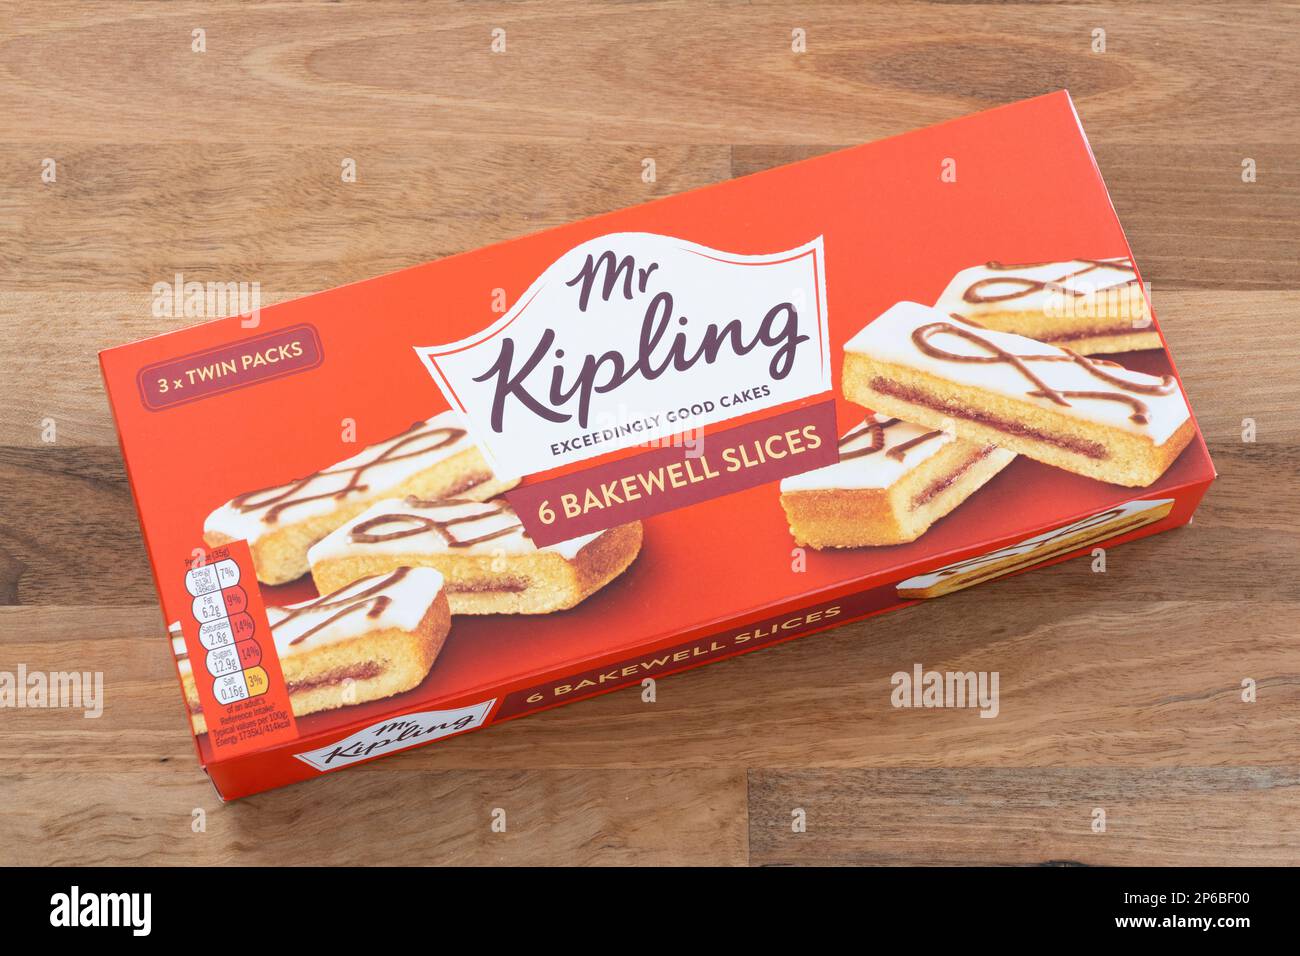 Mr Kipling packet of Bakewell Slices, UK. Concept: snacking, snack food, unhealthy eating, high sugar content Stock Photo